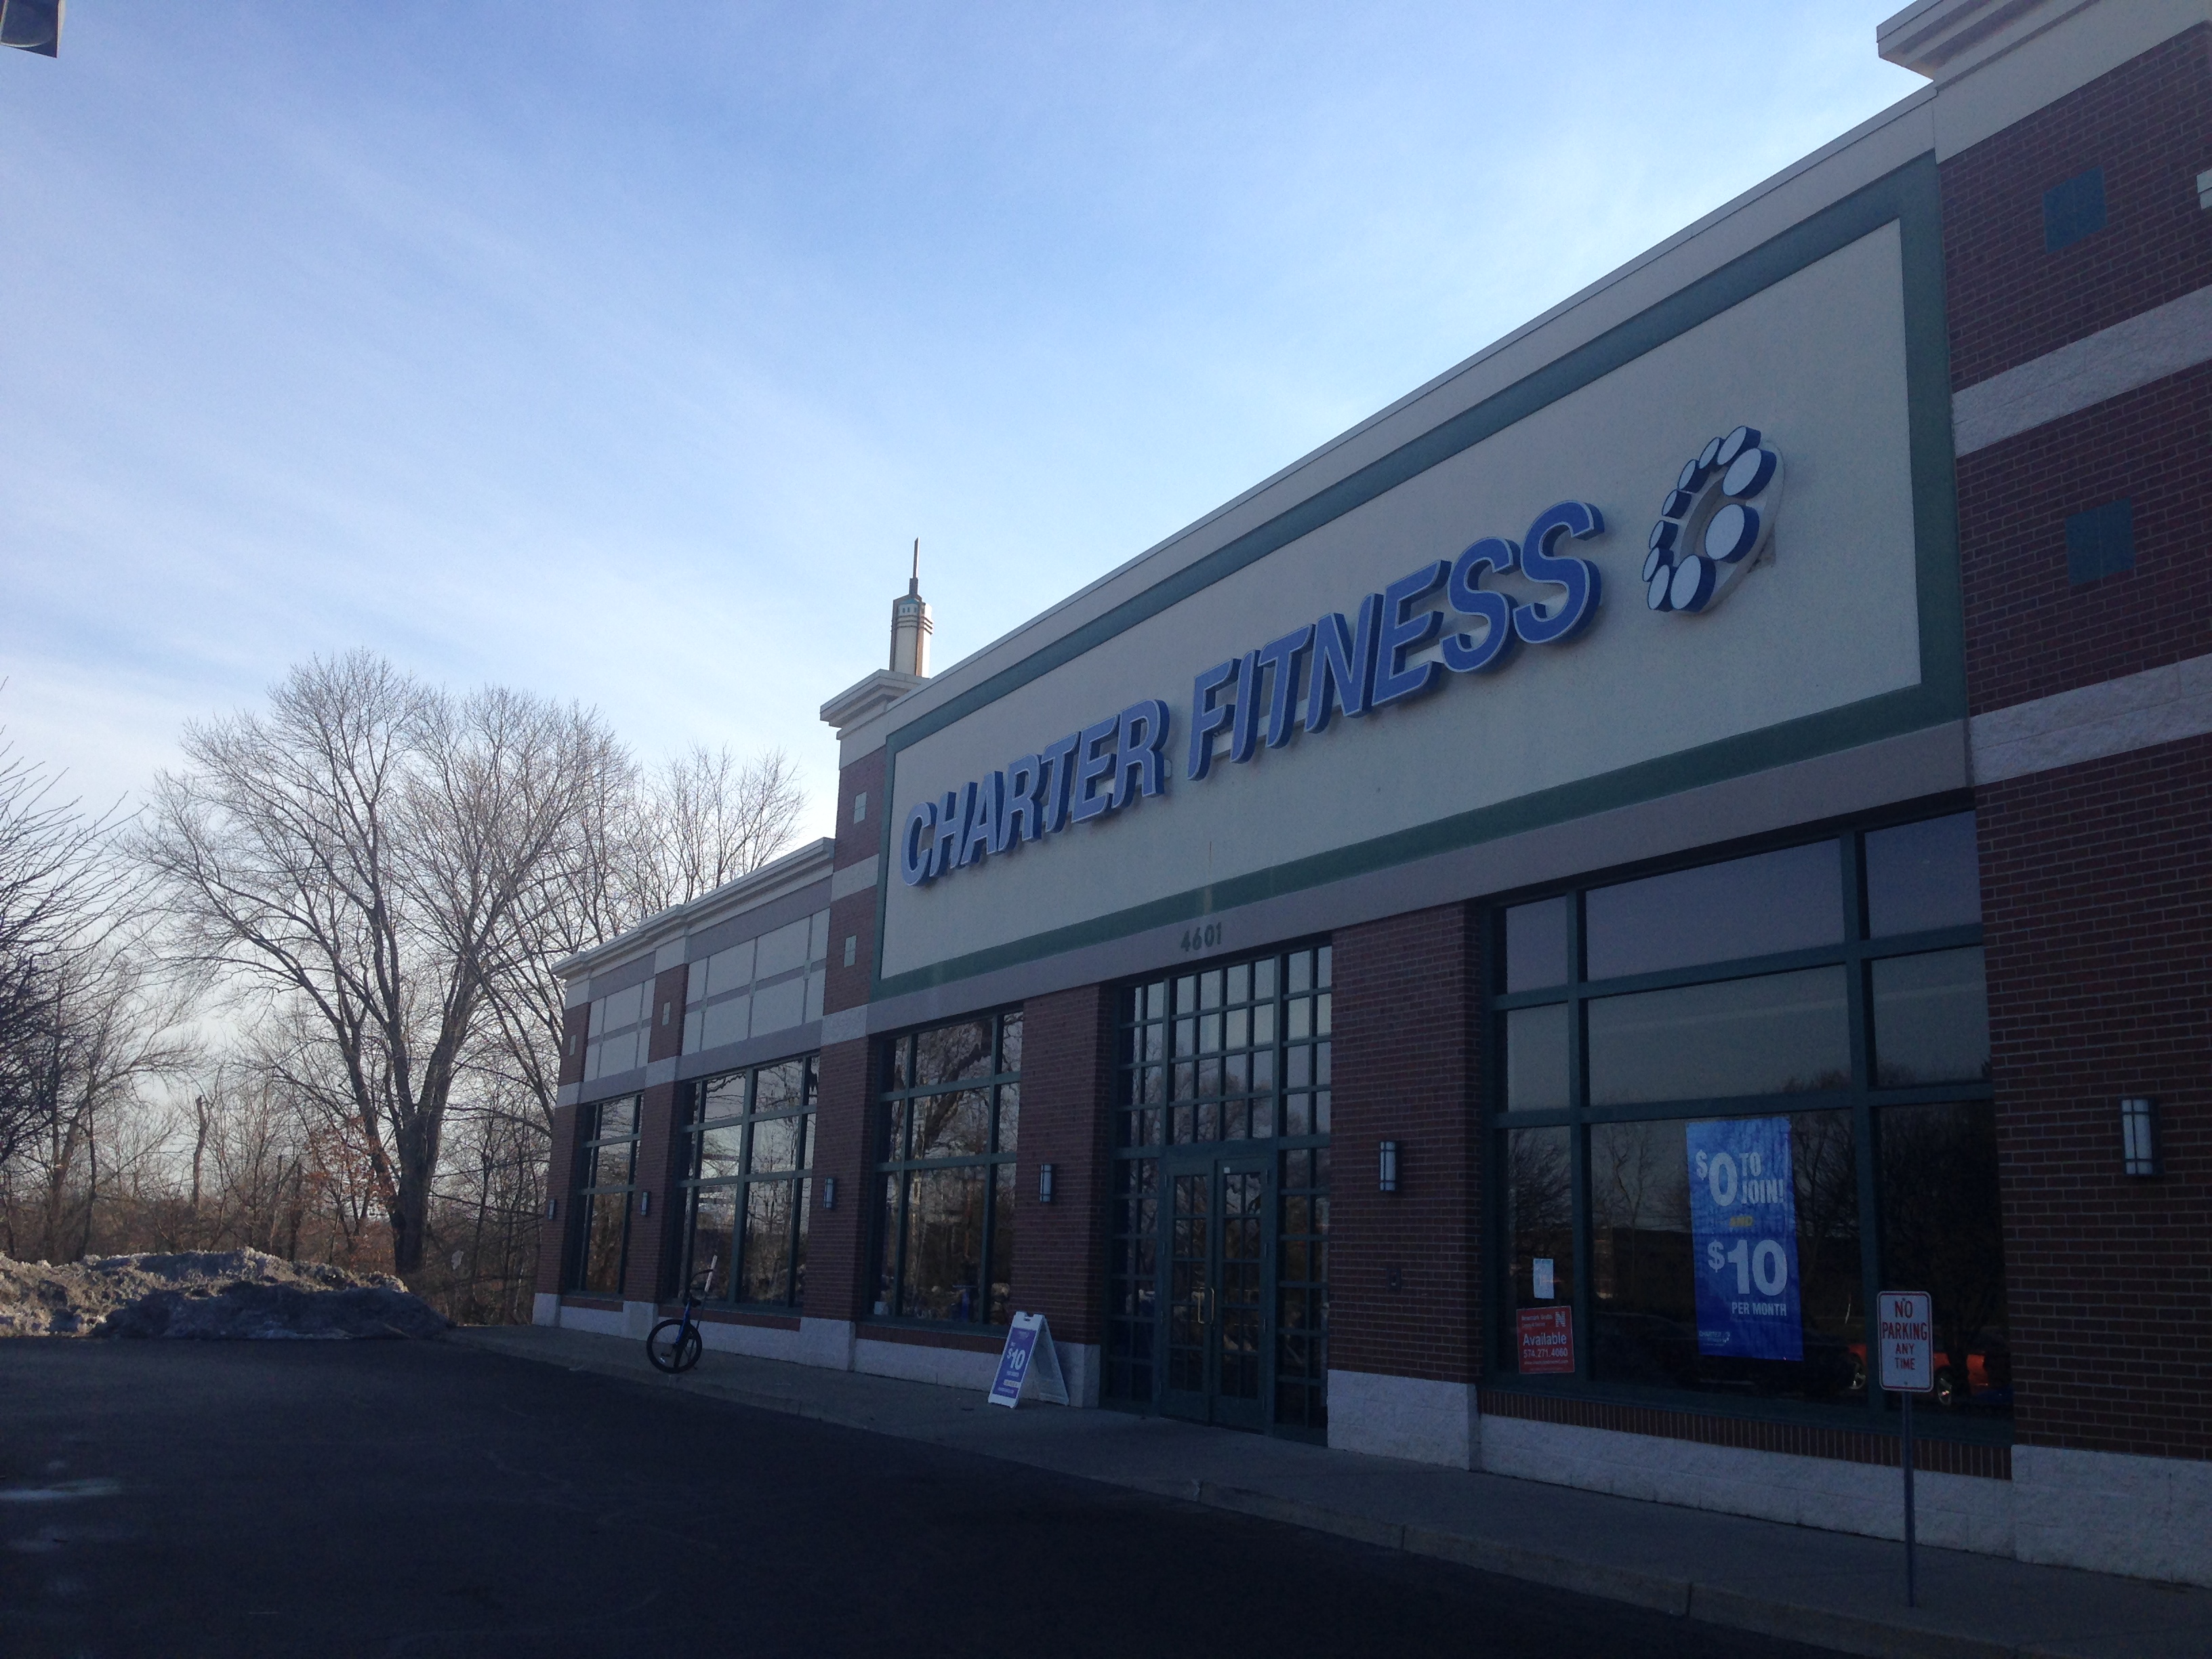 The new Charter Fitness in Mishawaka, IN opened in March in a converted Barnes & Noble building.